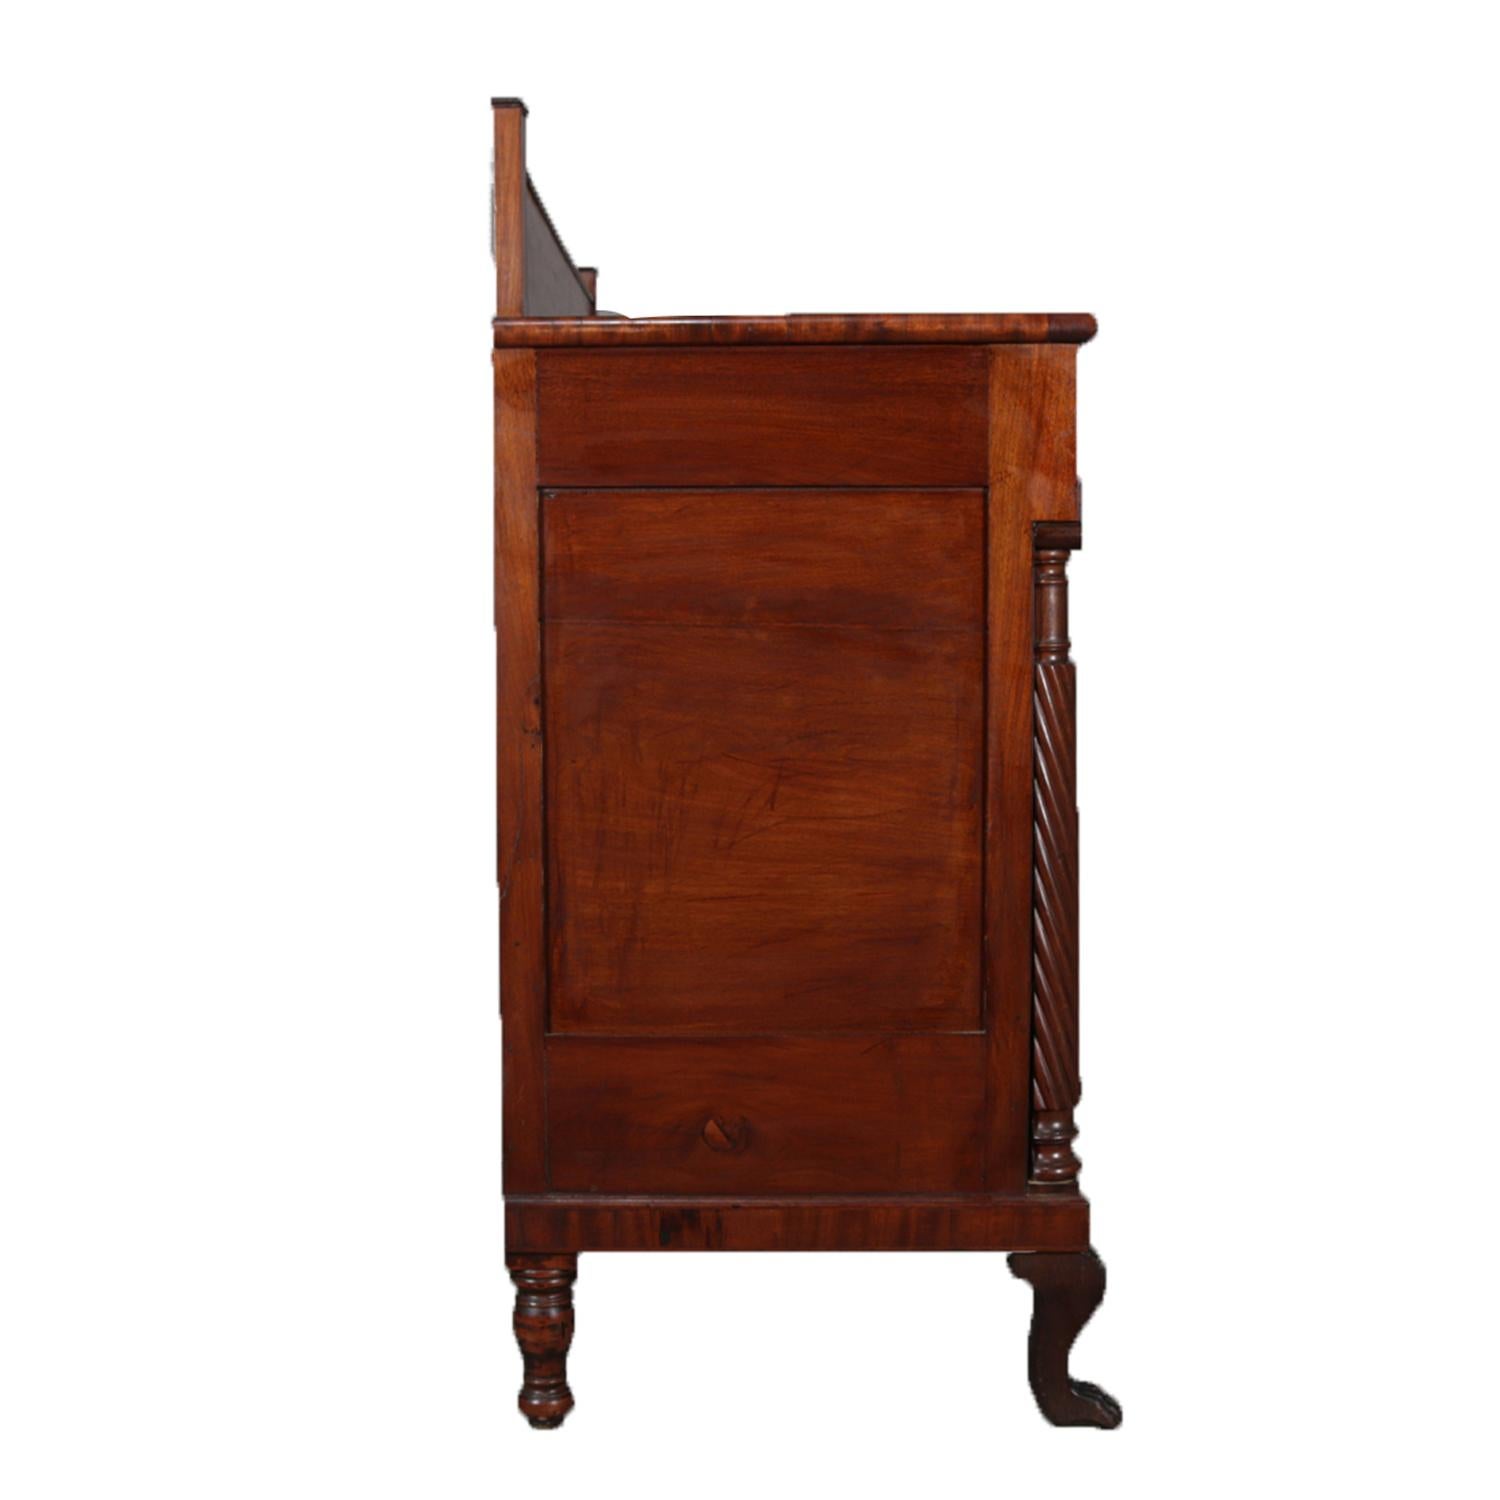 Carved Antique American Empire Flame Mahogany and Bronze Sideboard, circa 1830